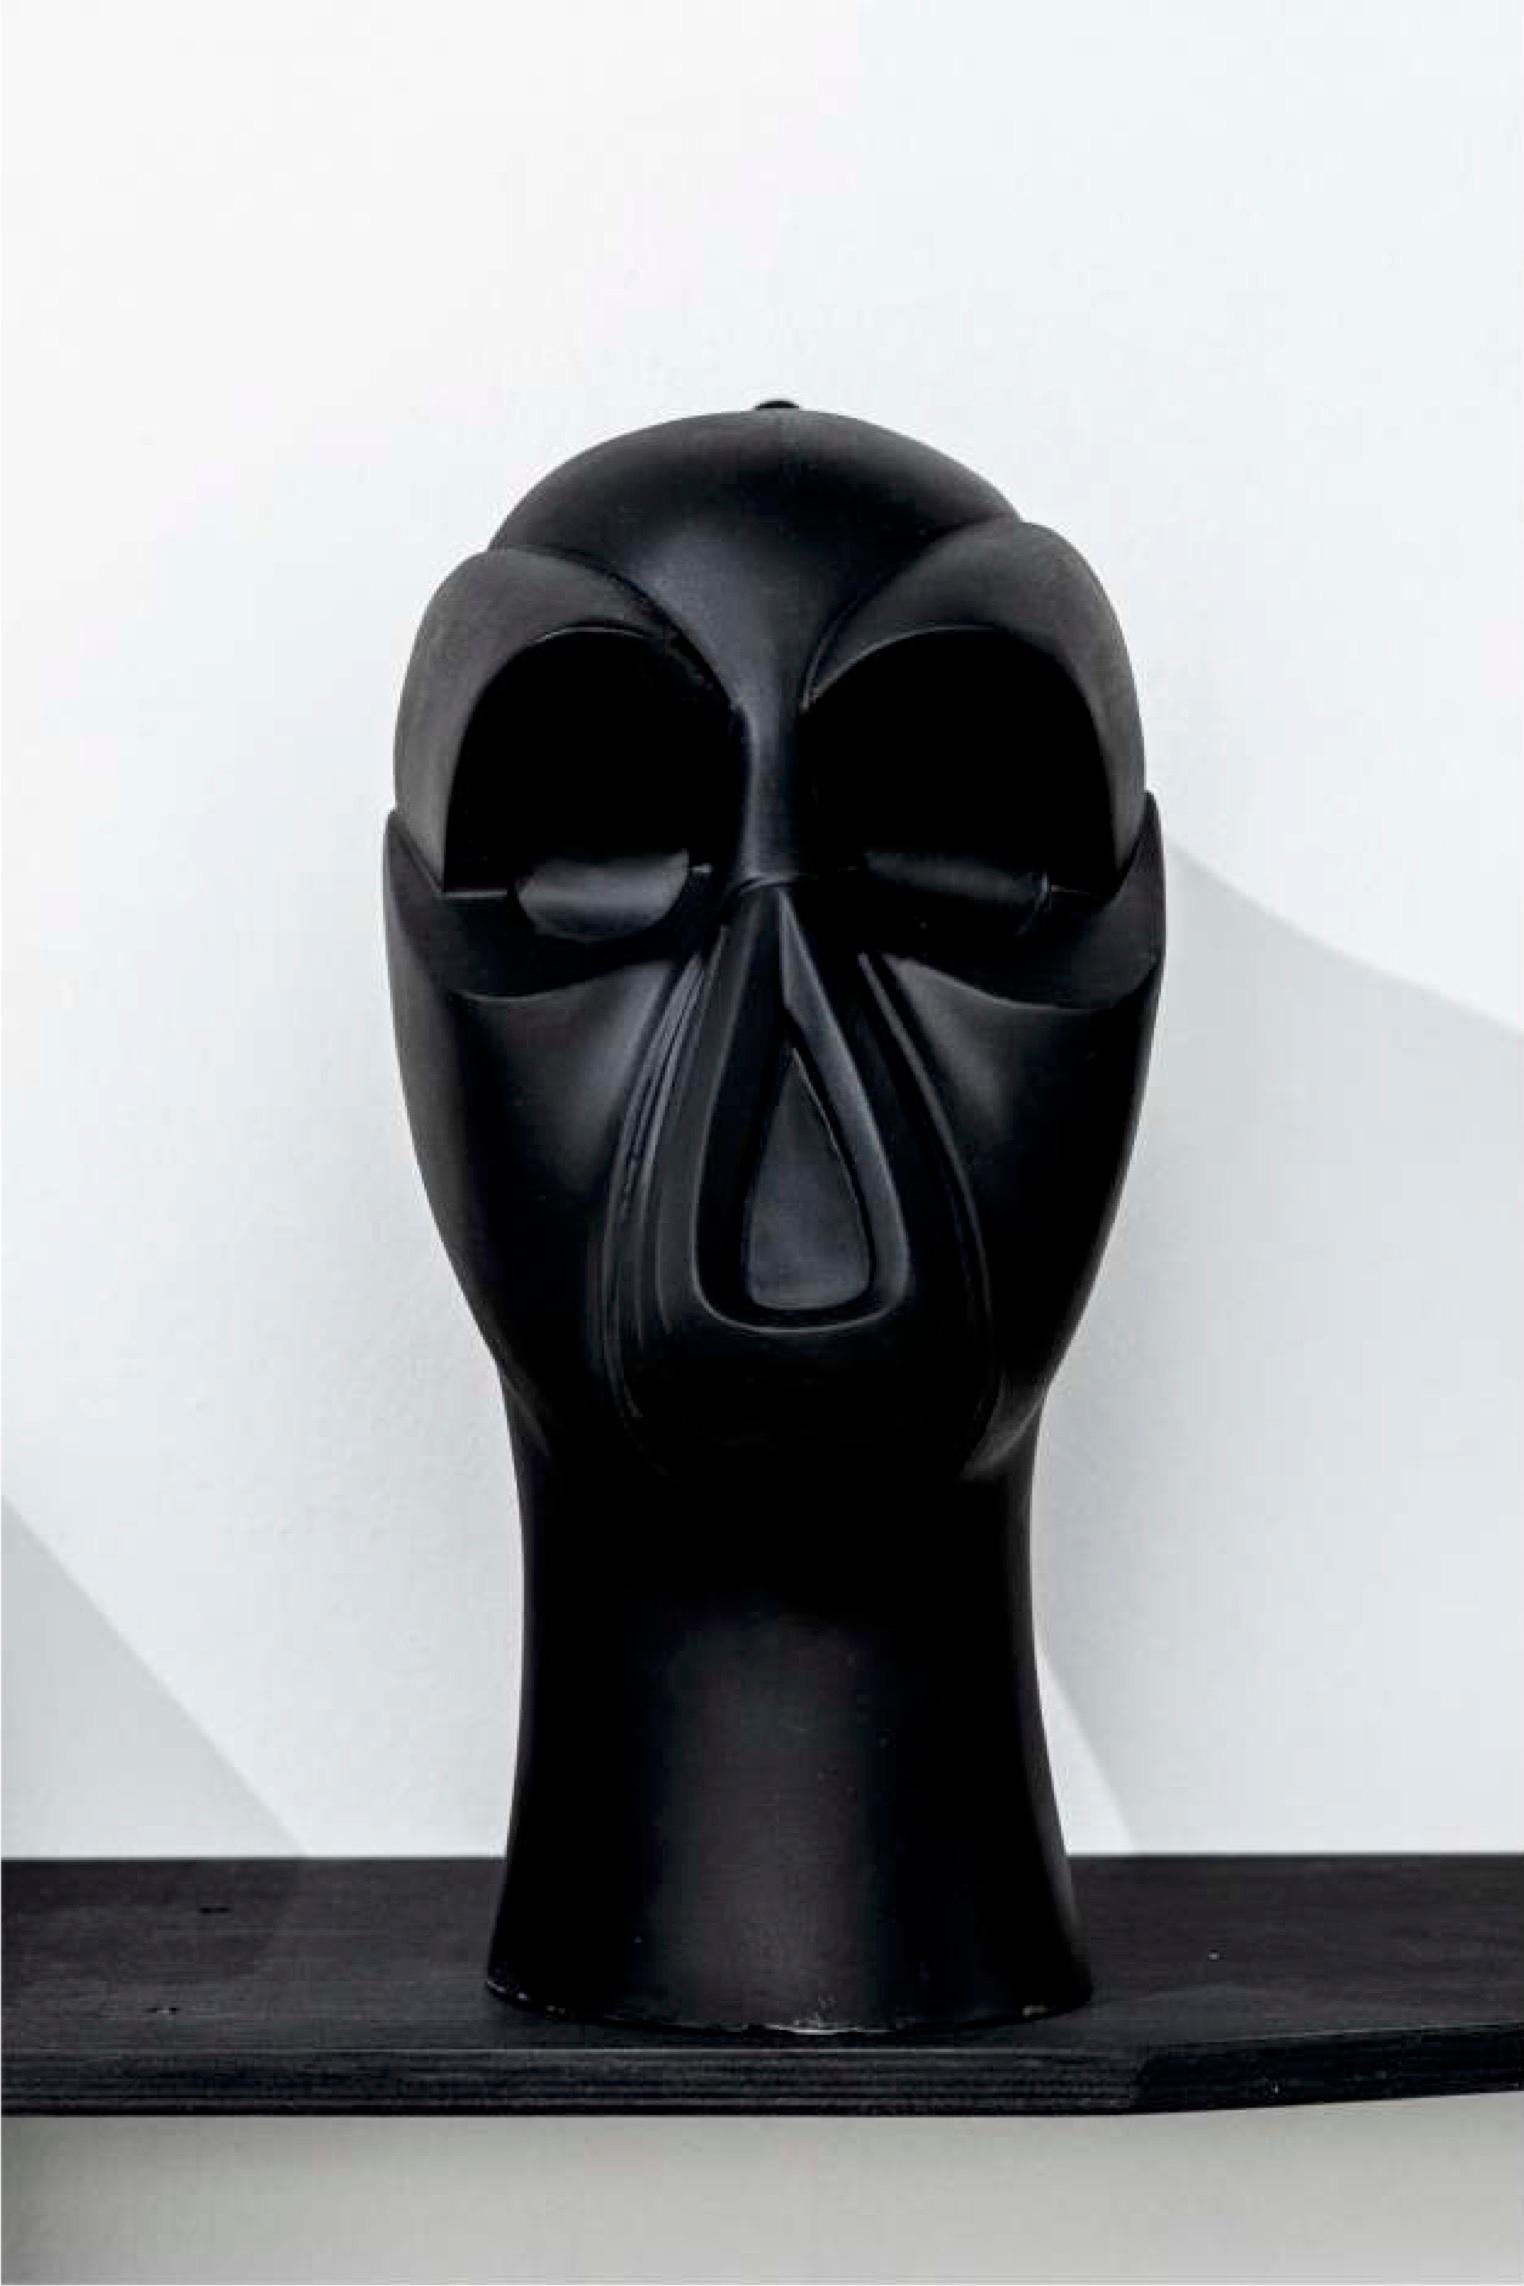 "Mask of the Minister of Education" Sculpture 16" x 13" in by Gosha Ostretsov

Edition 2/10

Born in 1967, in Moscow
Lived in Paris for ten years (1988 - 1998), now lives and works in Moscow.

PUBLIC COLLECTIONS:

The State Tretyakov Gallery, St.